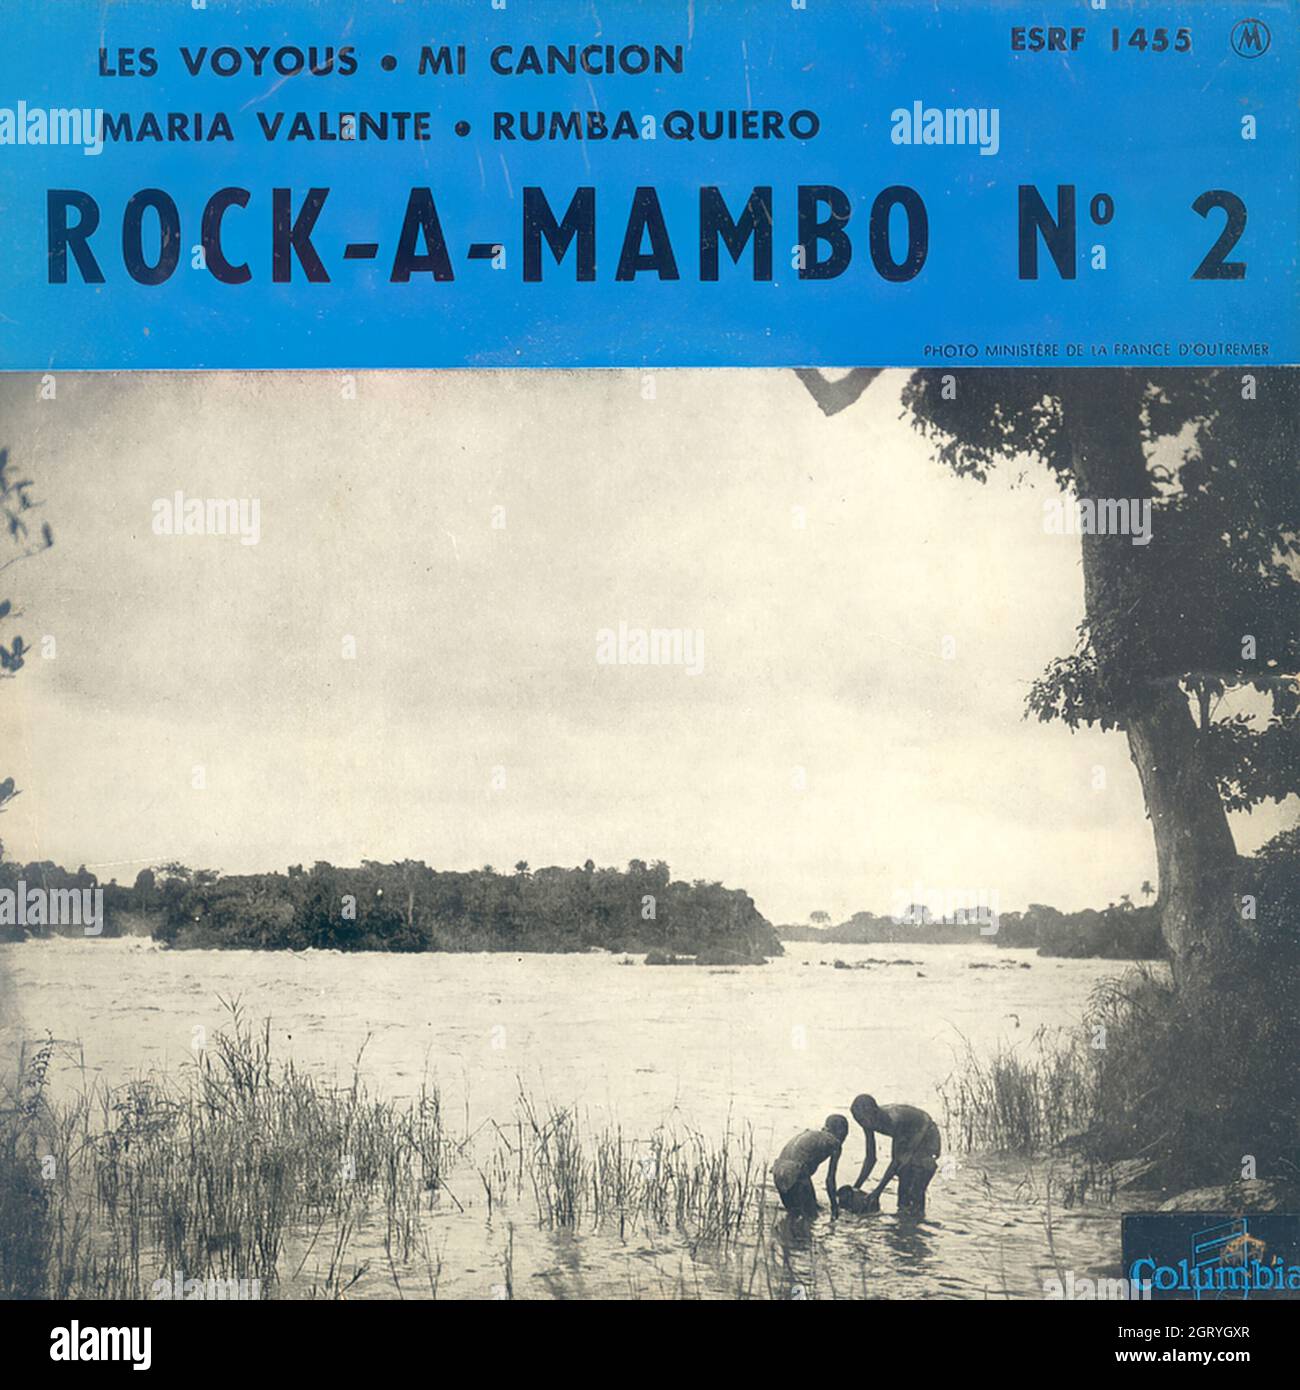 Orchestre Rock - A-Mambo & African Jazz - Rock-A-Mambo n°2 - Vintage Vinyl Record Cover Stock Photo